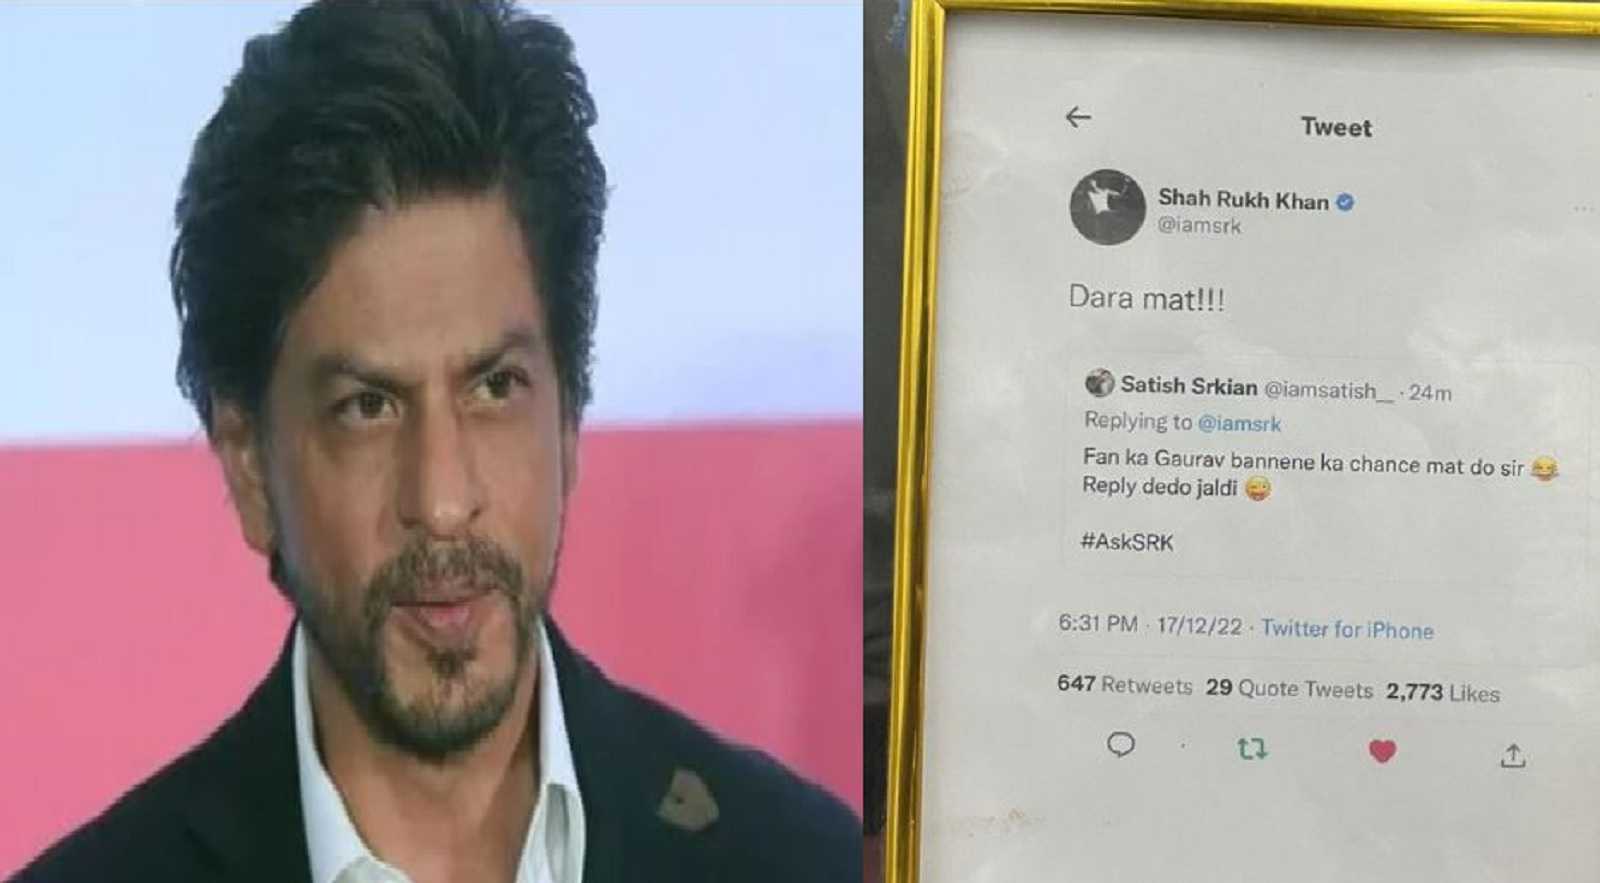 Shah Rukh Khan says 'dara mat' to a Twitter user who threatens to be Gaurav from Fan, latter gets his reply framed